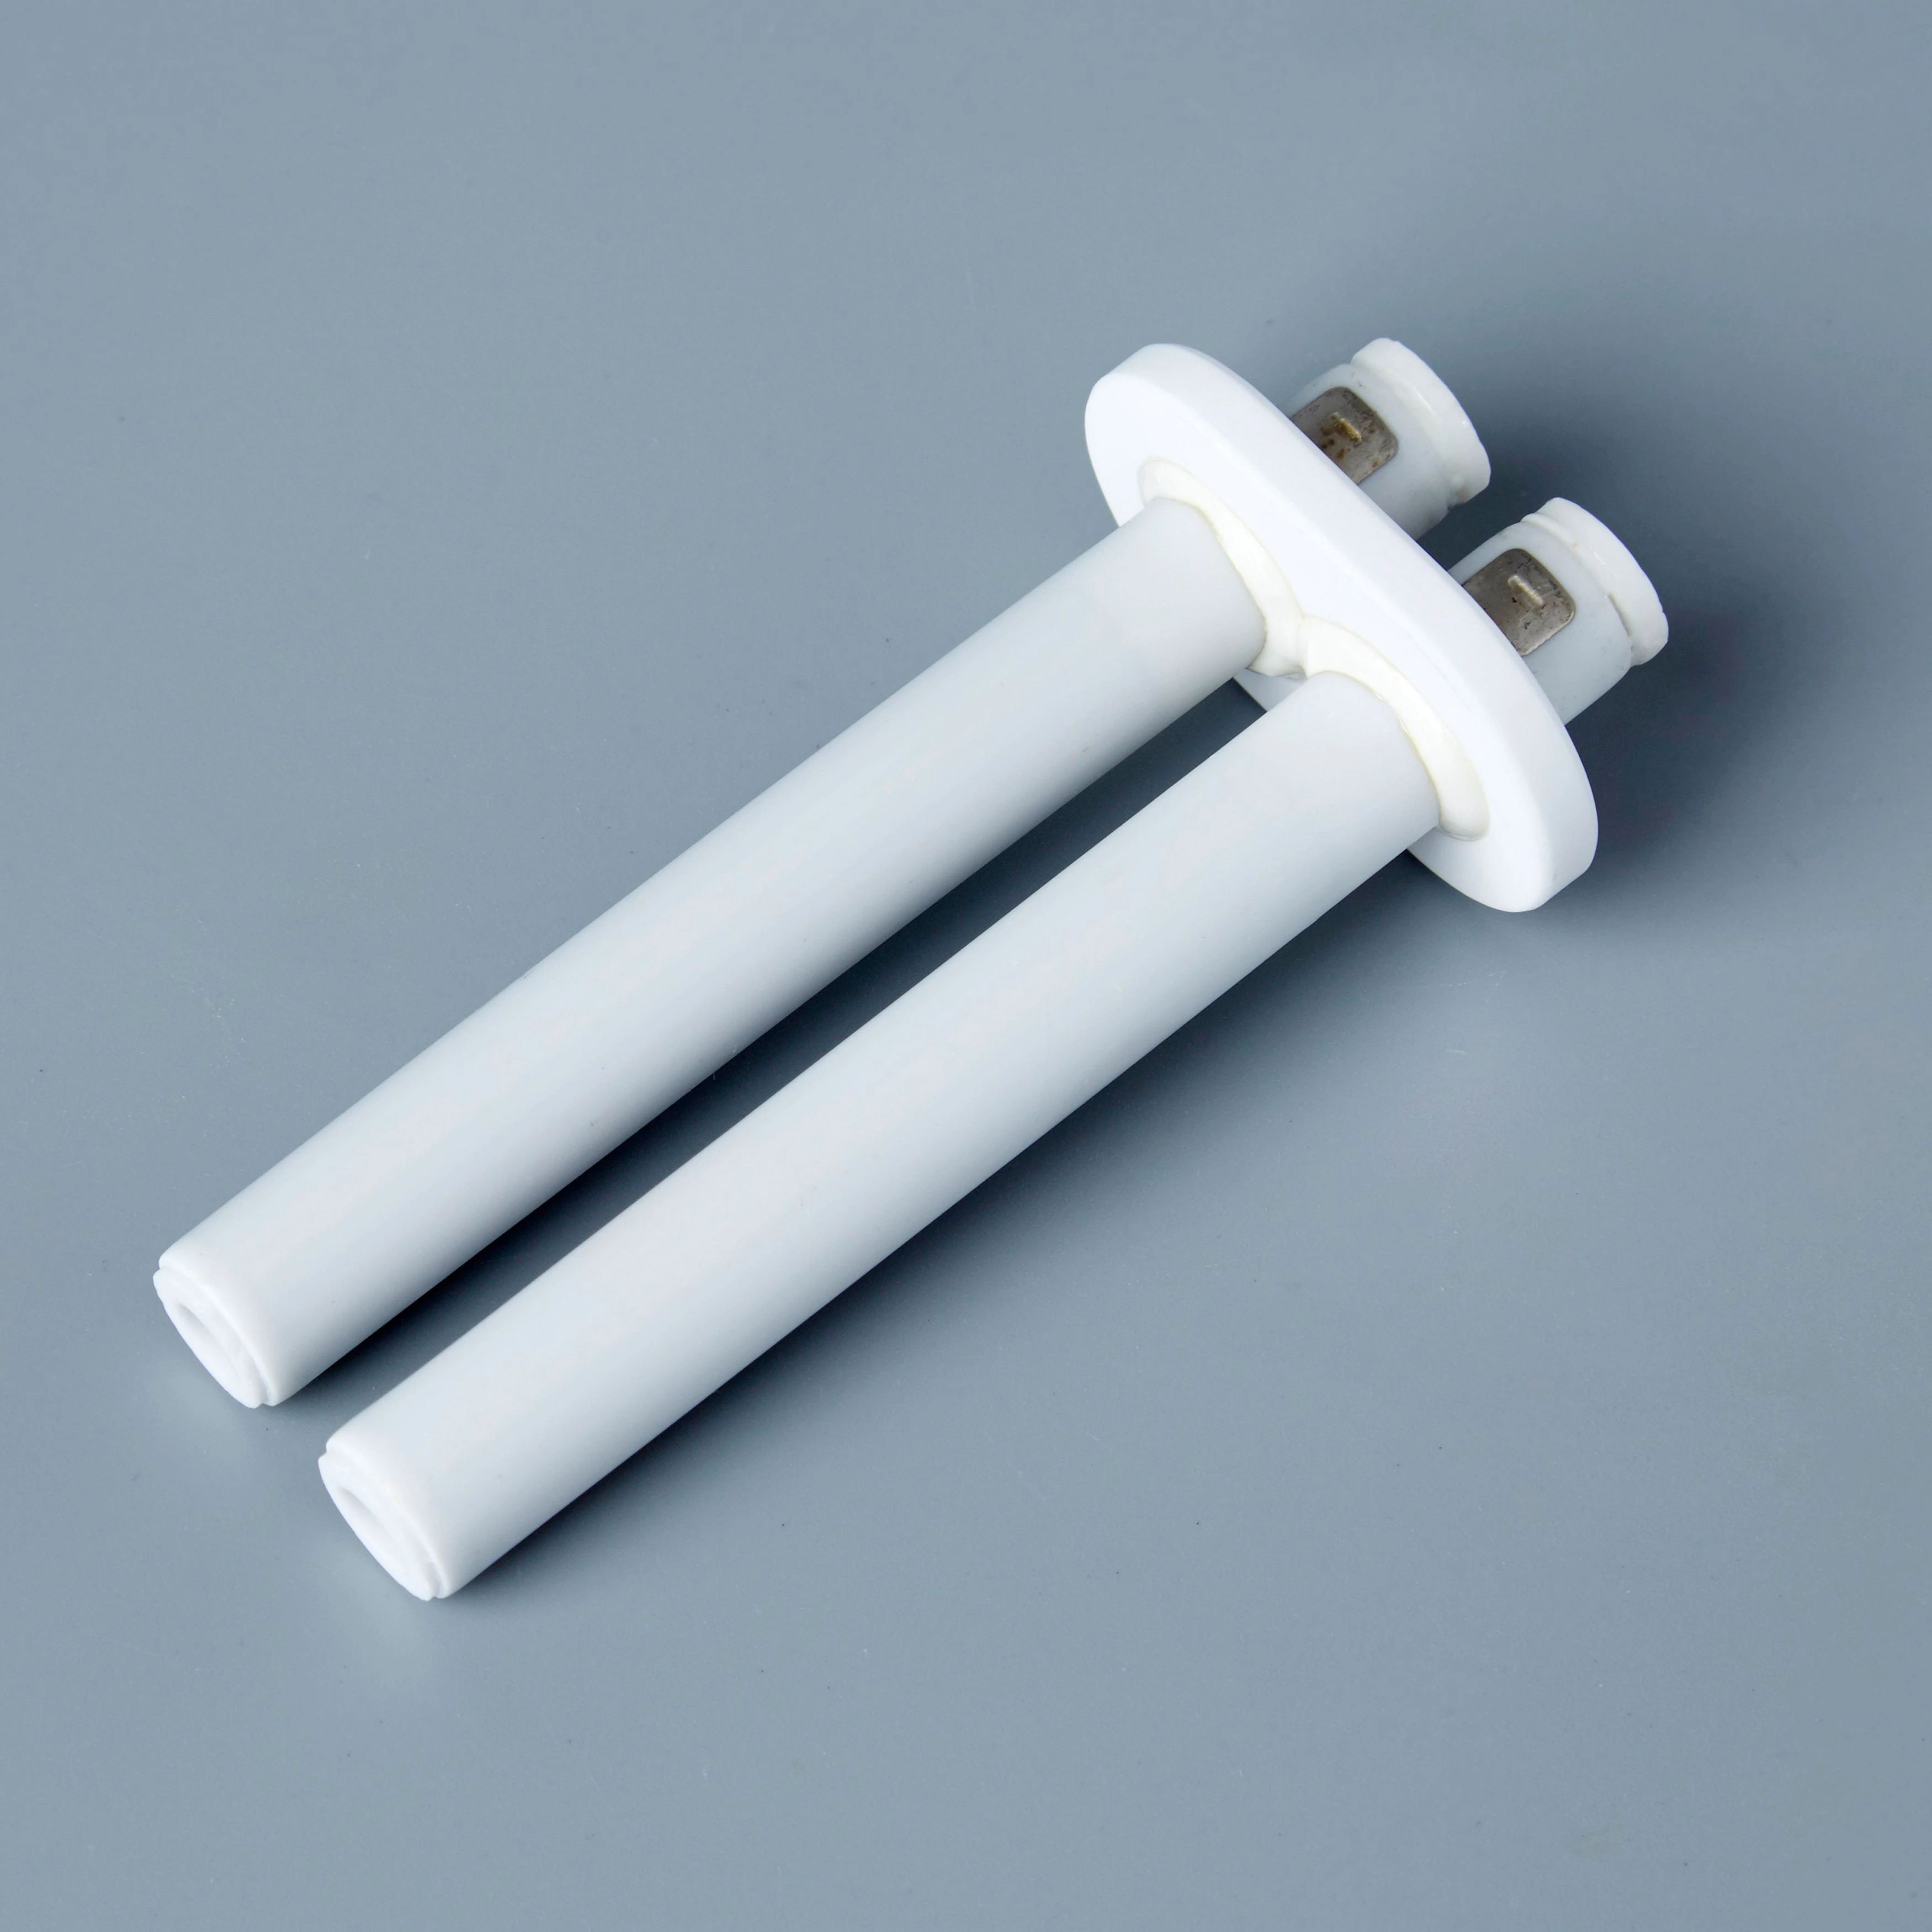 MCH ceramic heating element for instant water dispenser